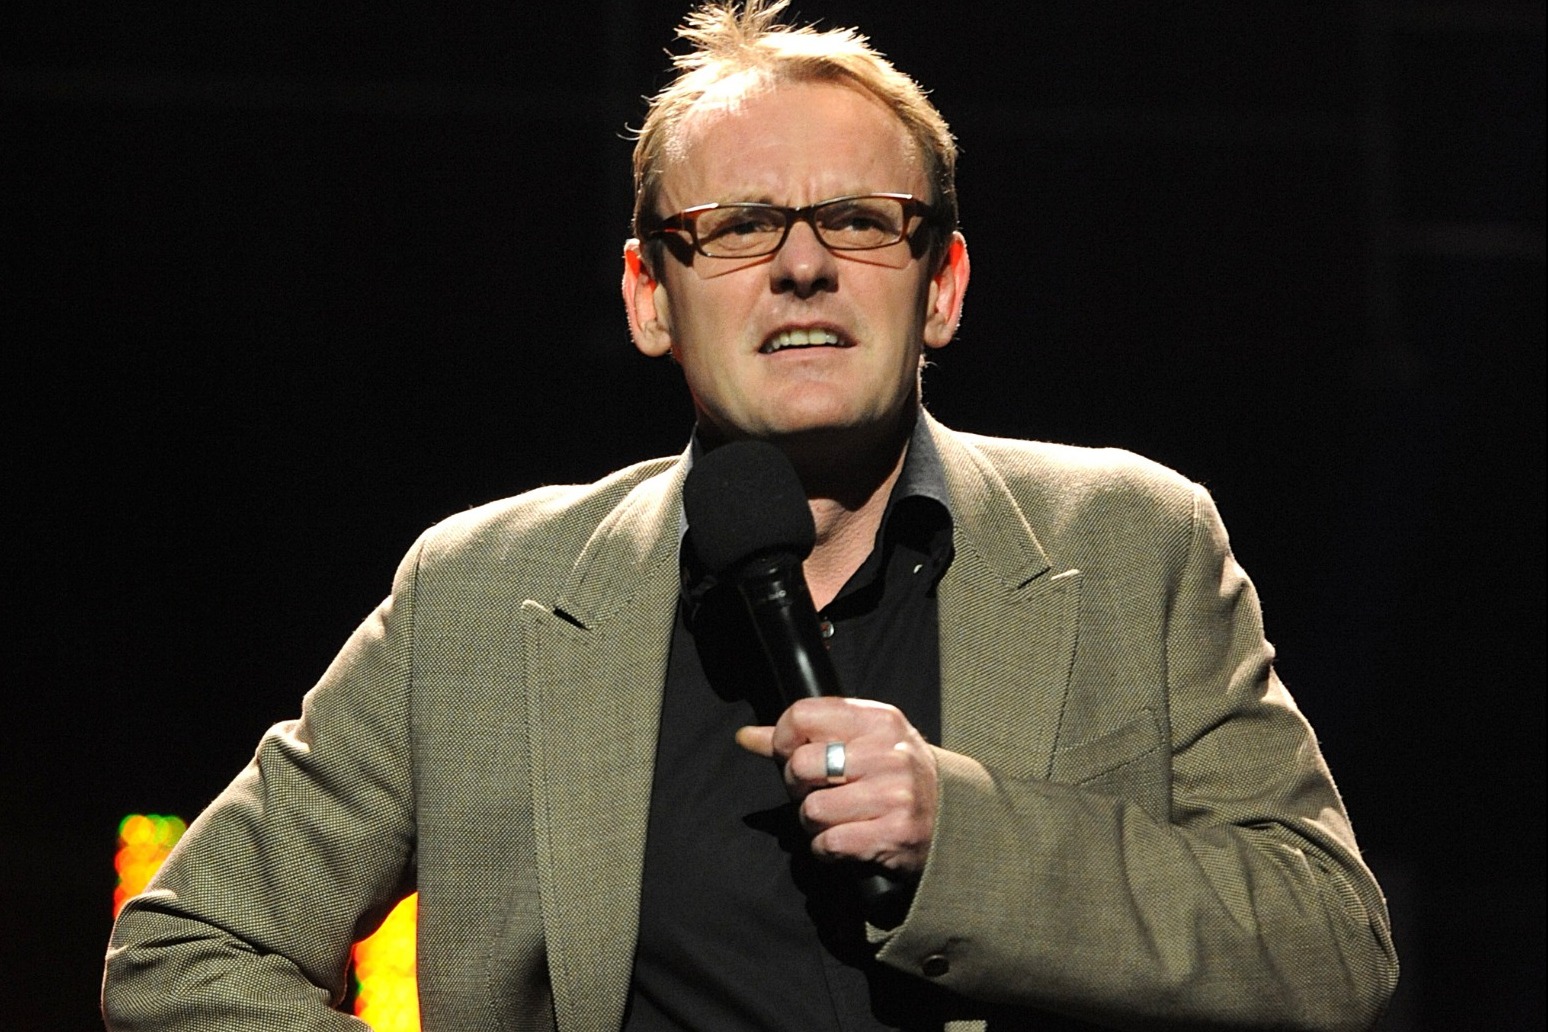 8 Out Of 10 Cats comedian Sean Lock dies aged 58 